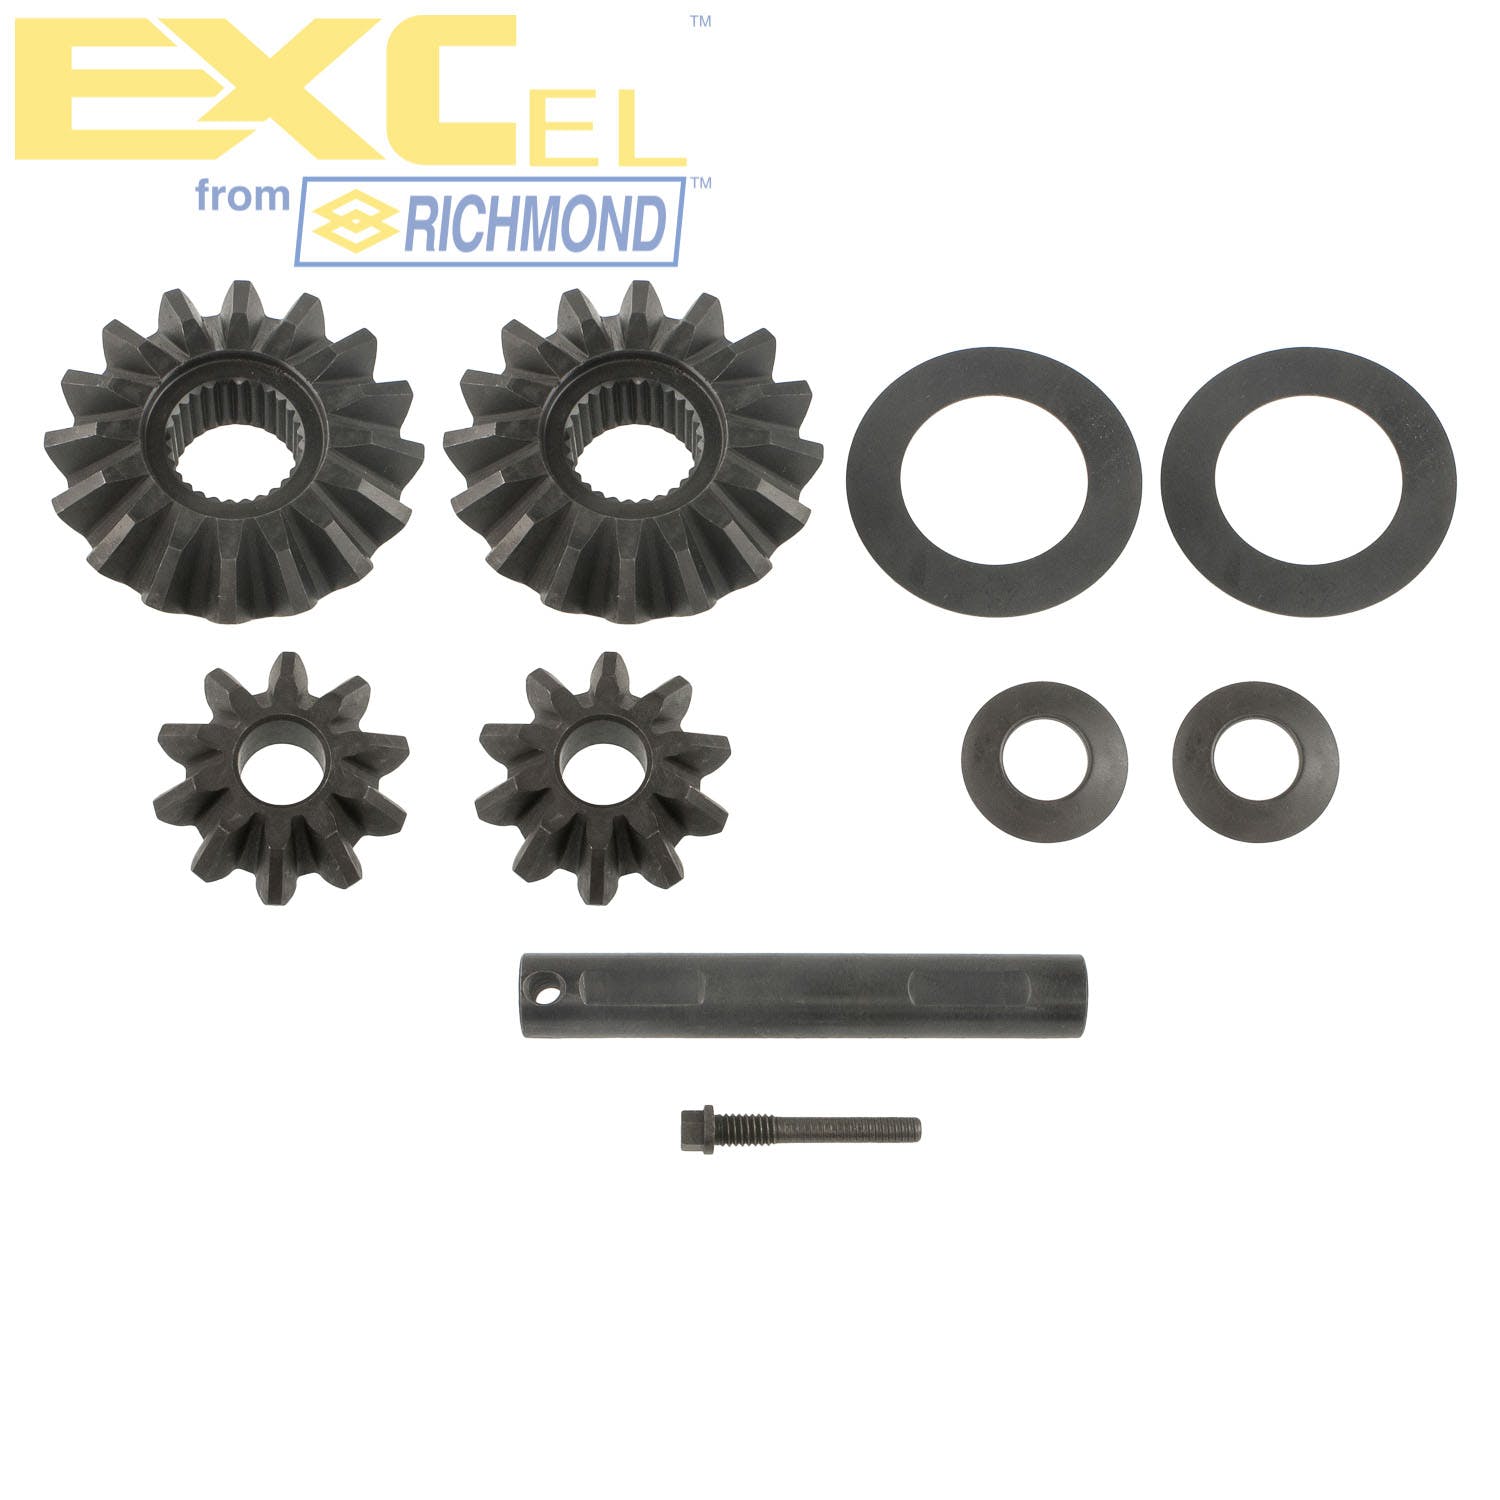 Excel XL-4013 Differential Carrier Gear Kit